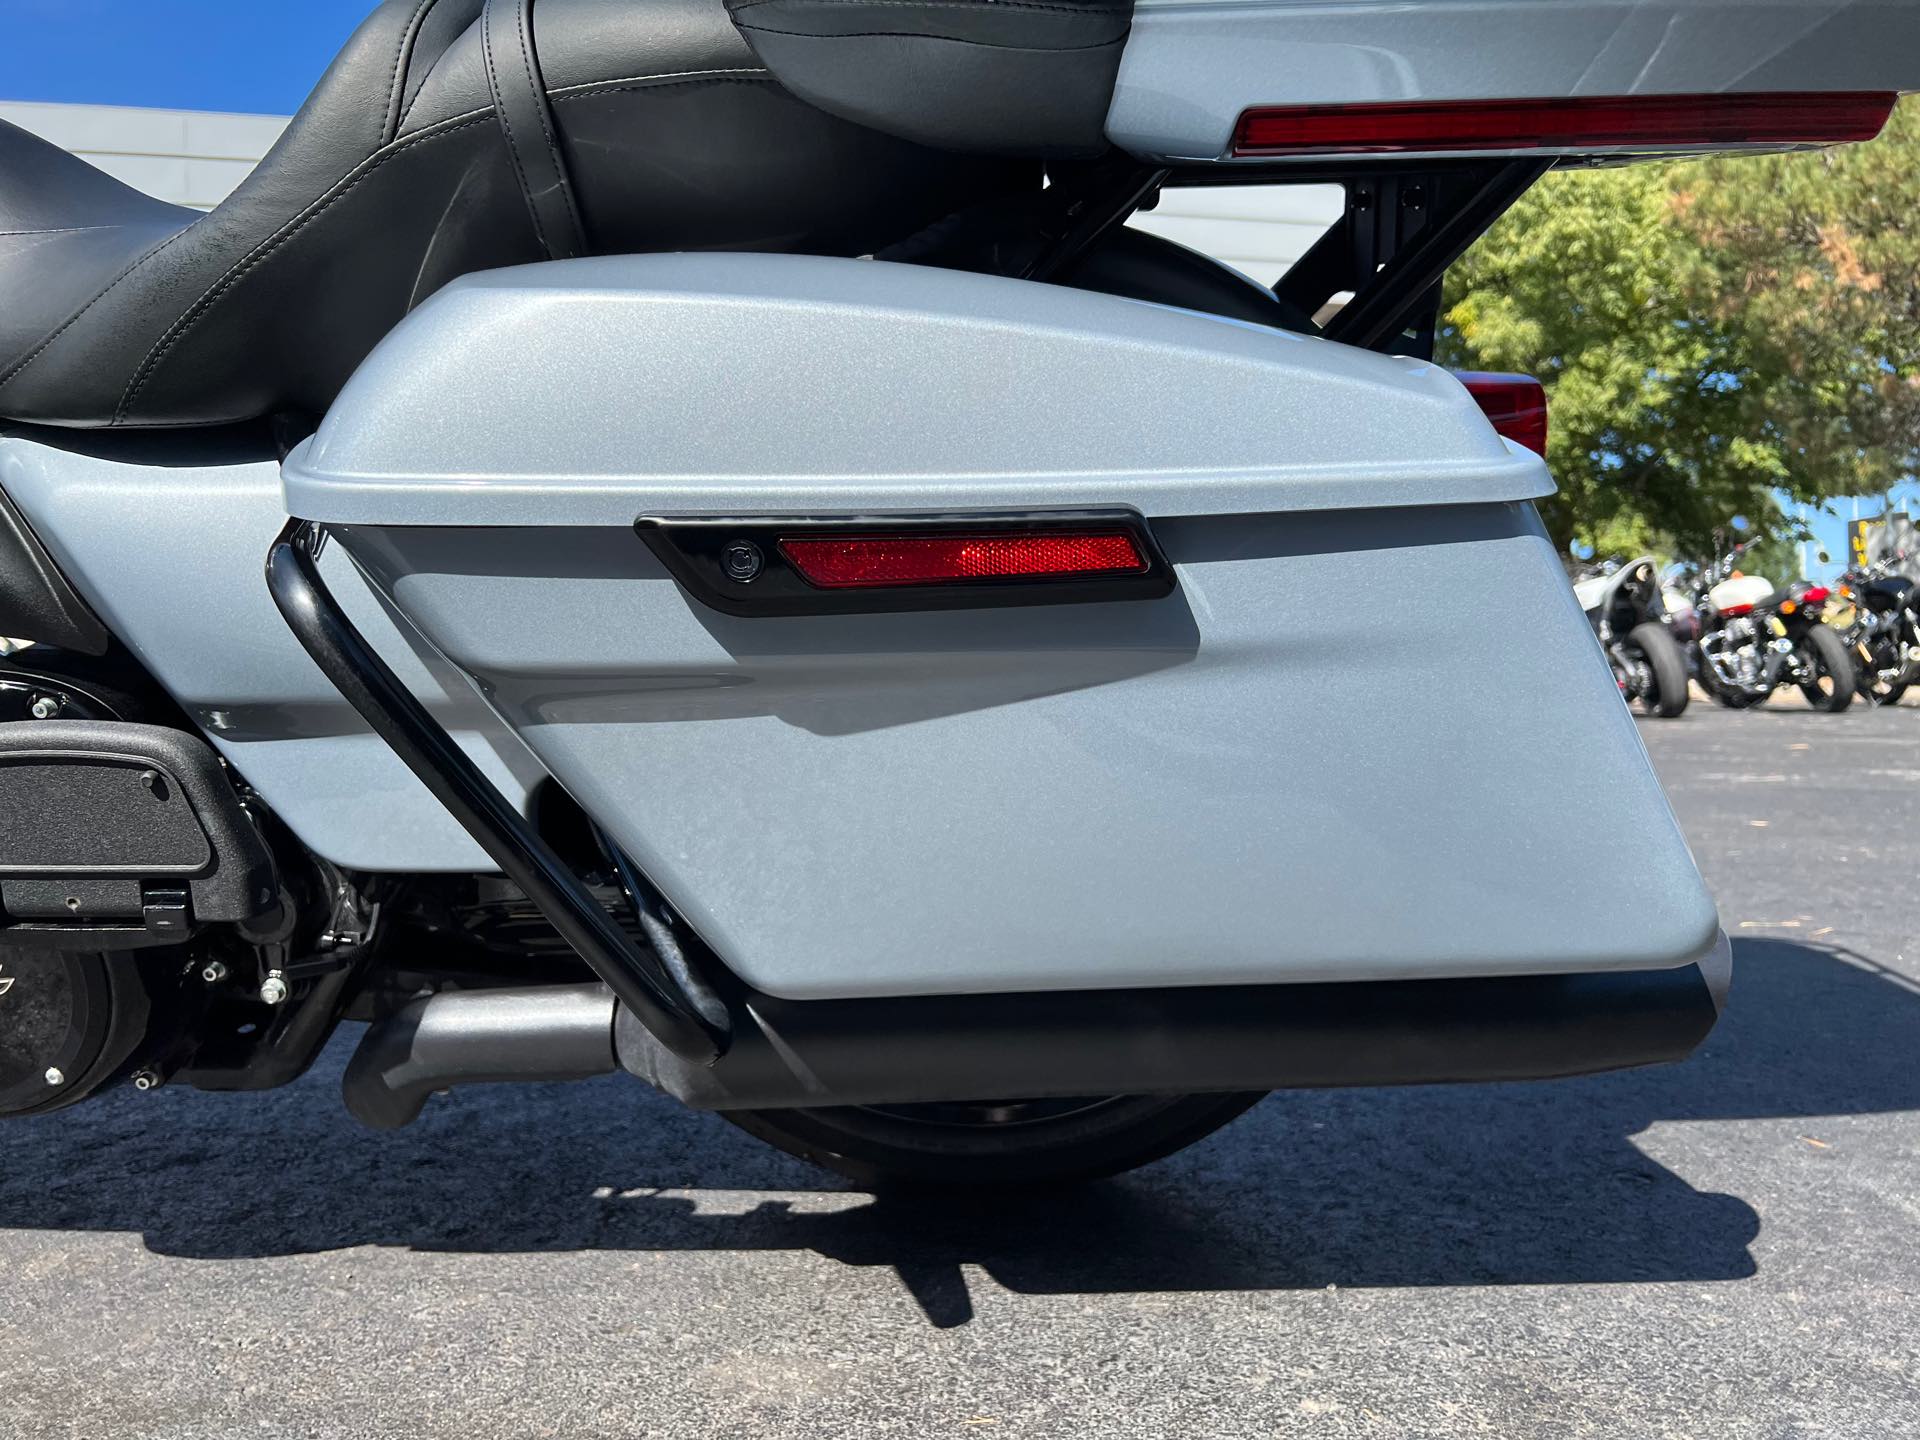 2023 Harley-Davidson Road Glide Limited at Aces Motorcycles - Fort Collins